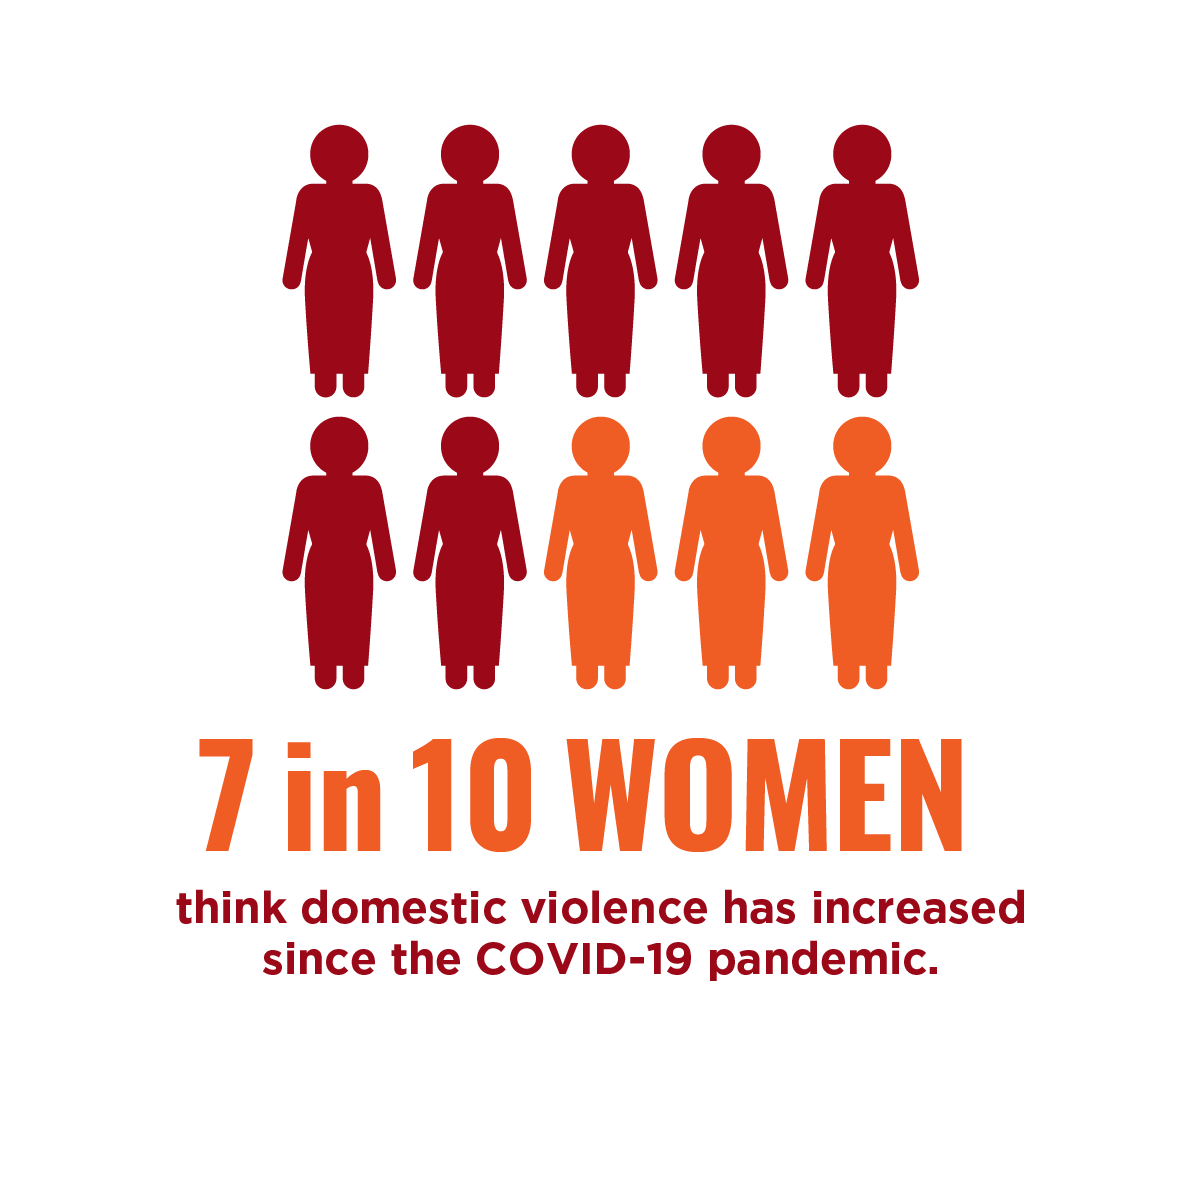 7 in 10 women think domestic violence has increased during the pandemic. 